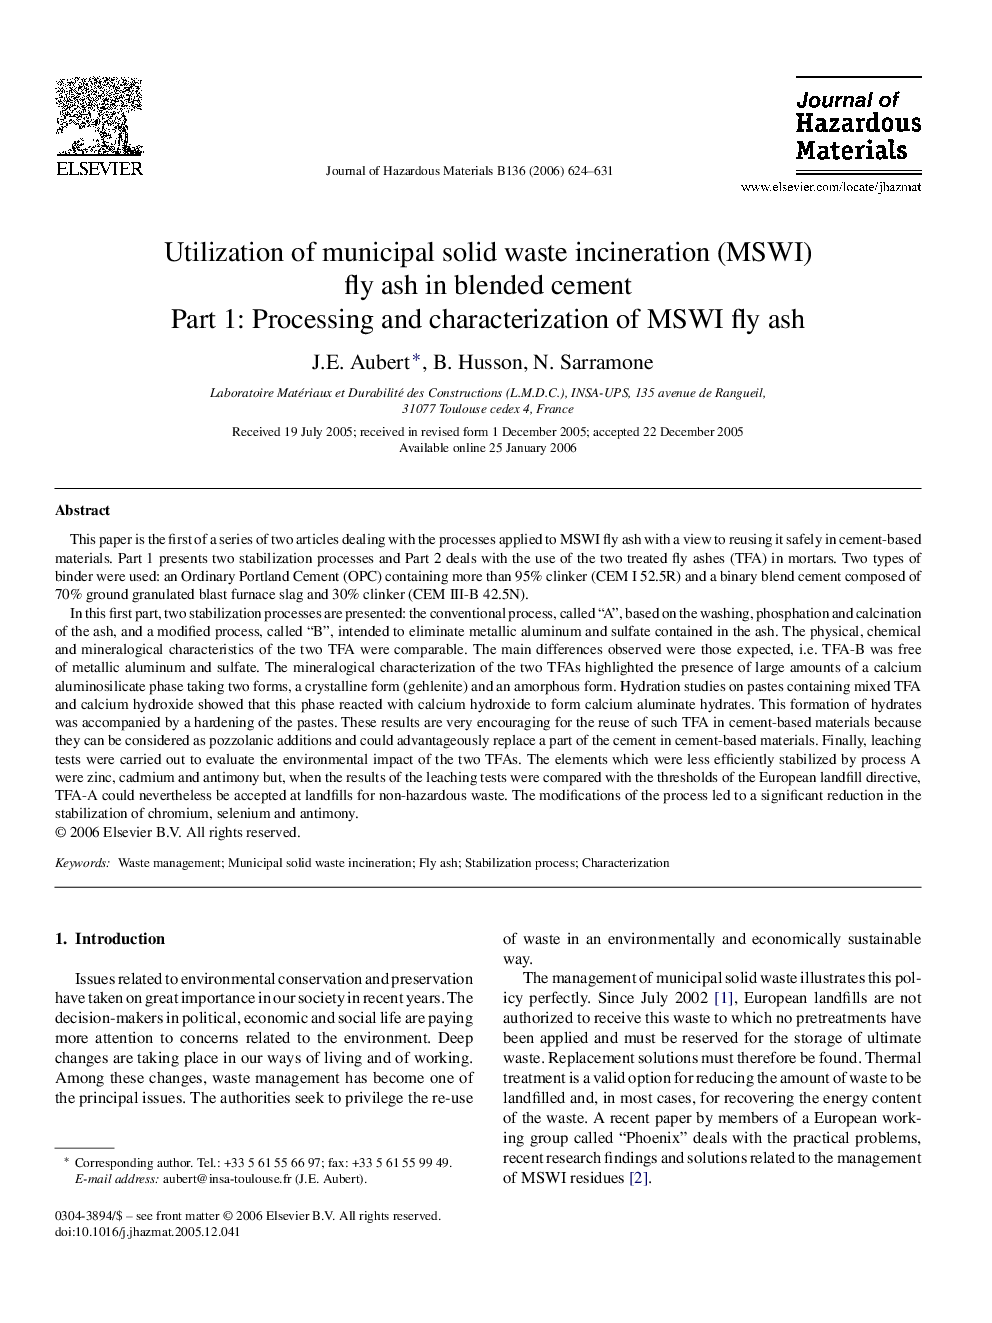 Utilization of municipal solid waste incineration (MSWI) fly ash in blended cement: Part 1: Processing and characterization of MSWI fly ash